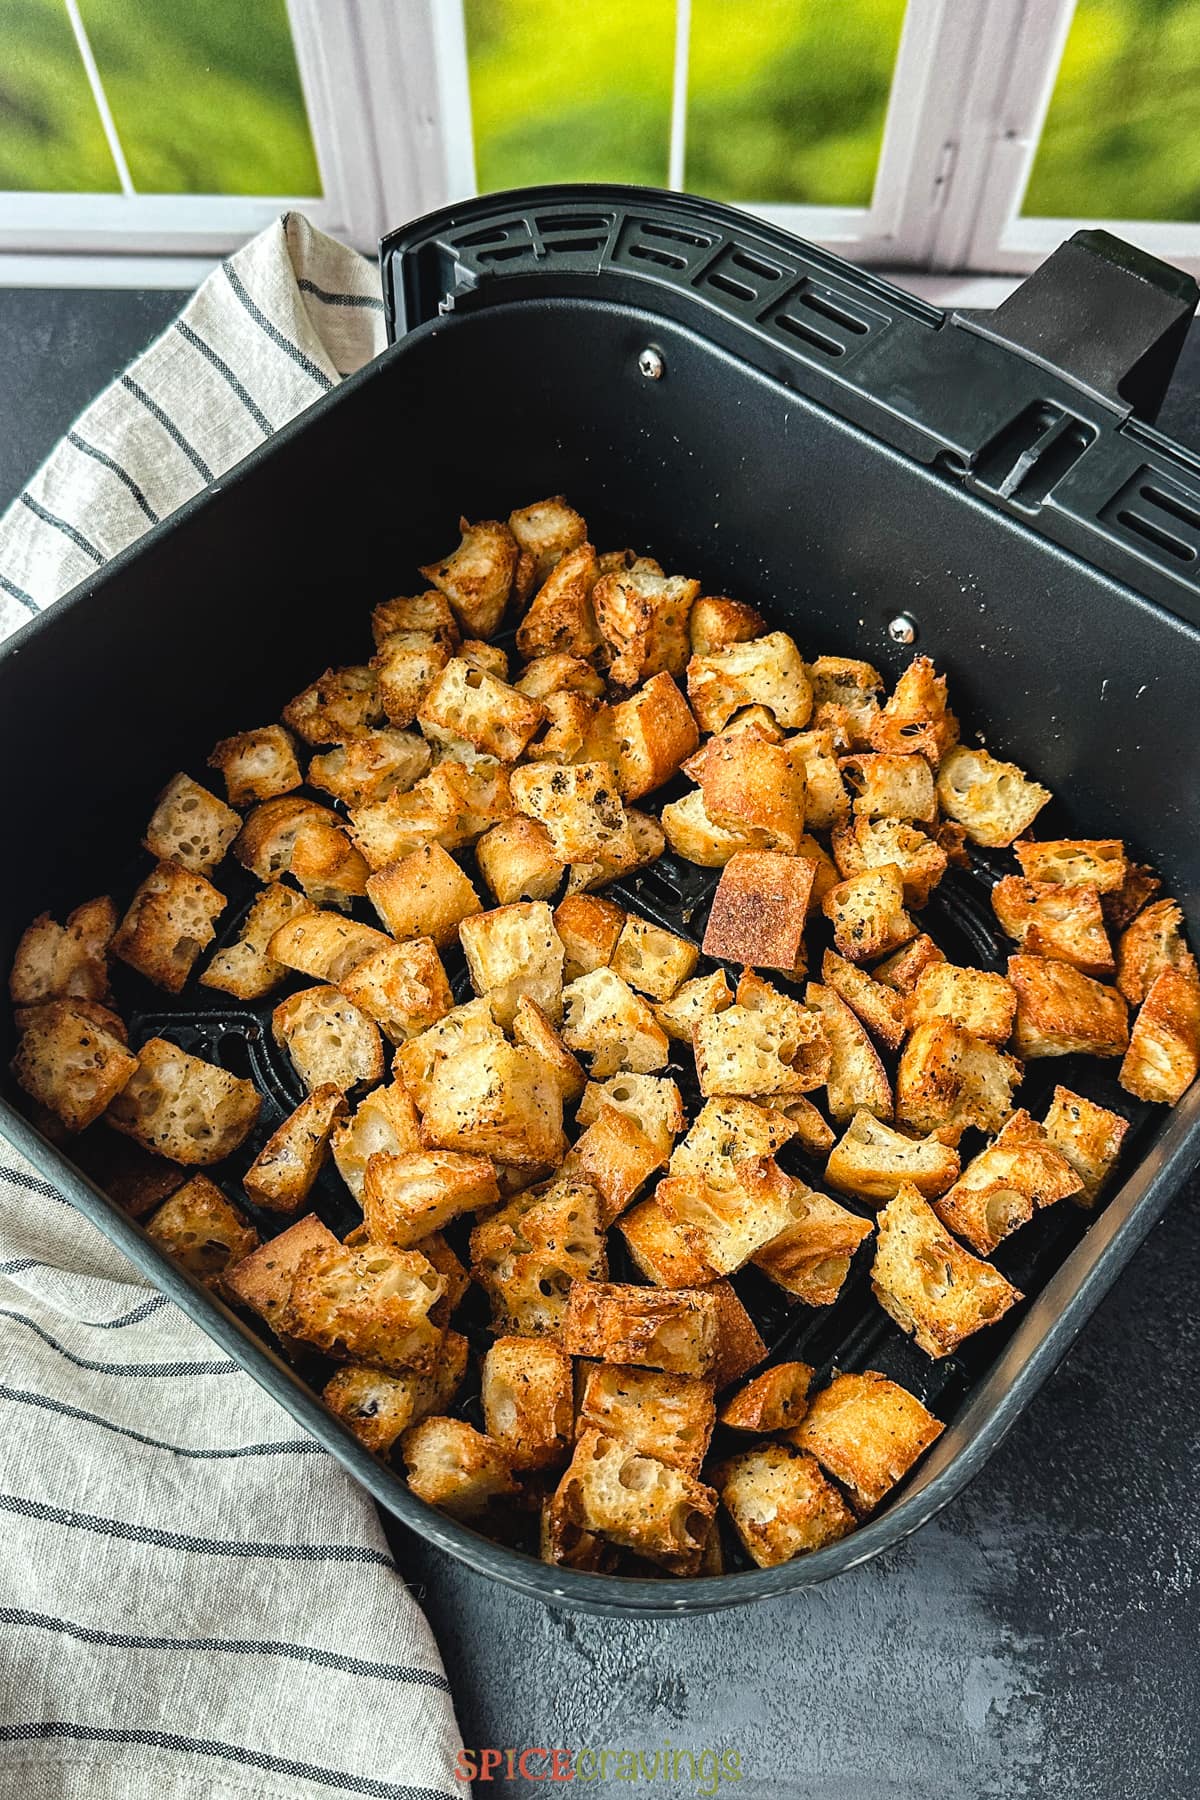 Croutons in the air fryer basket